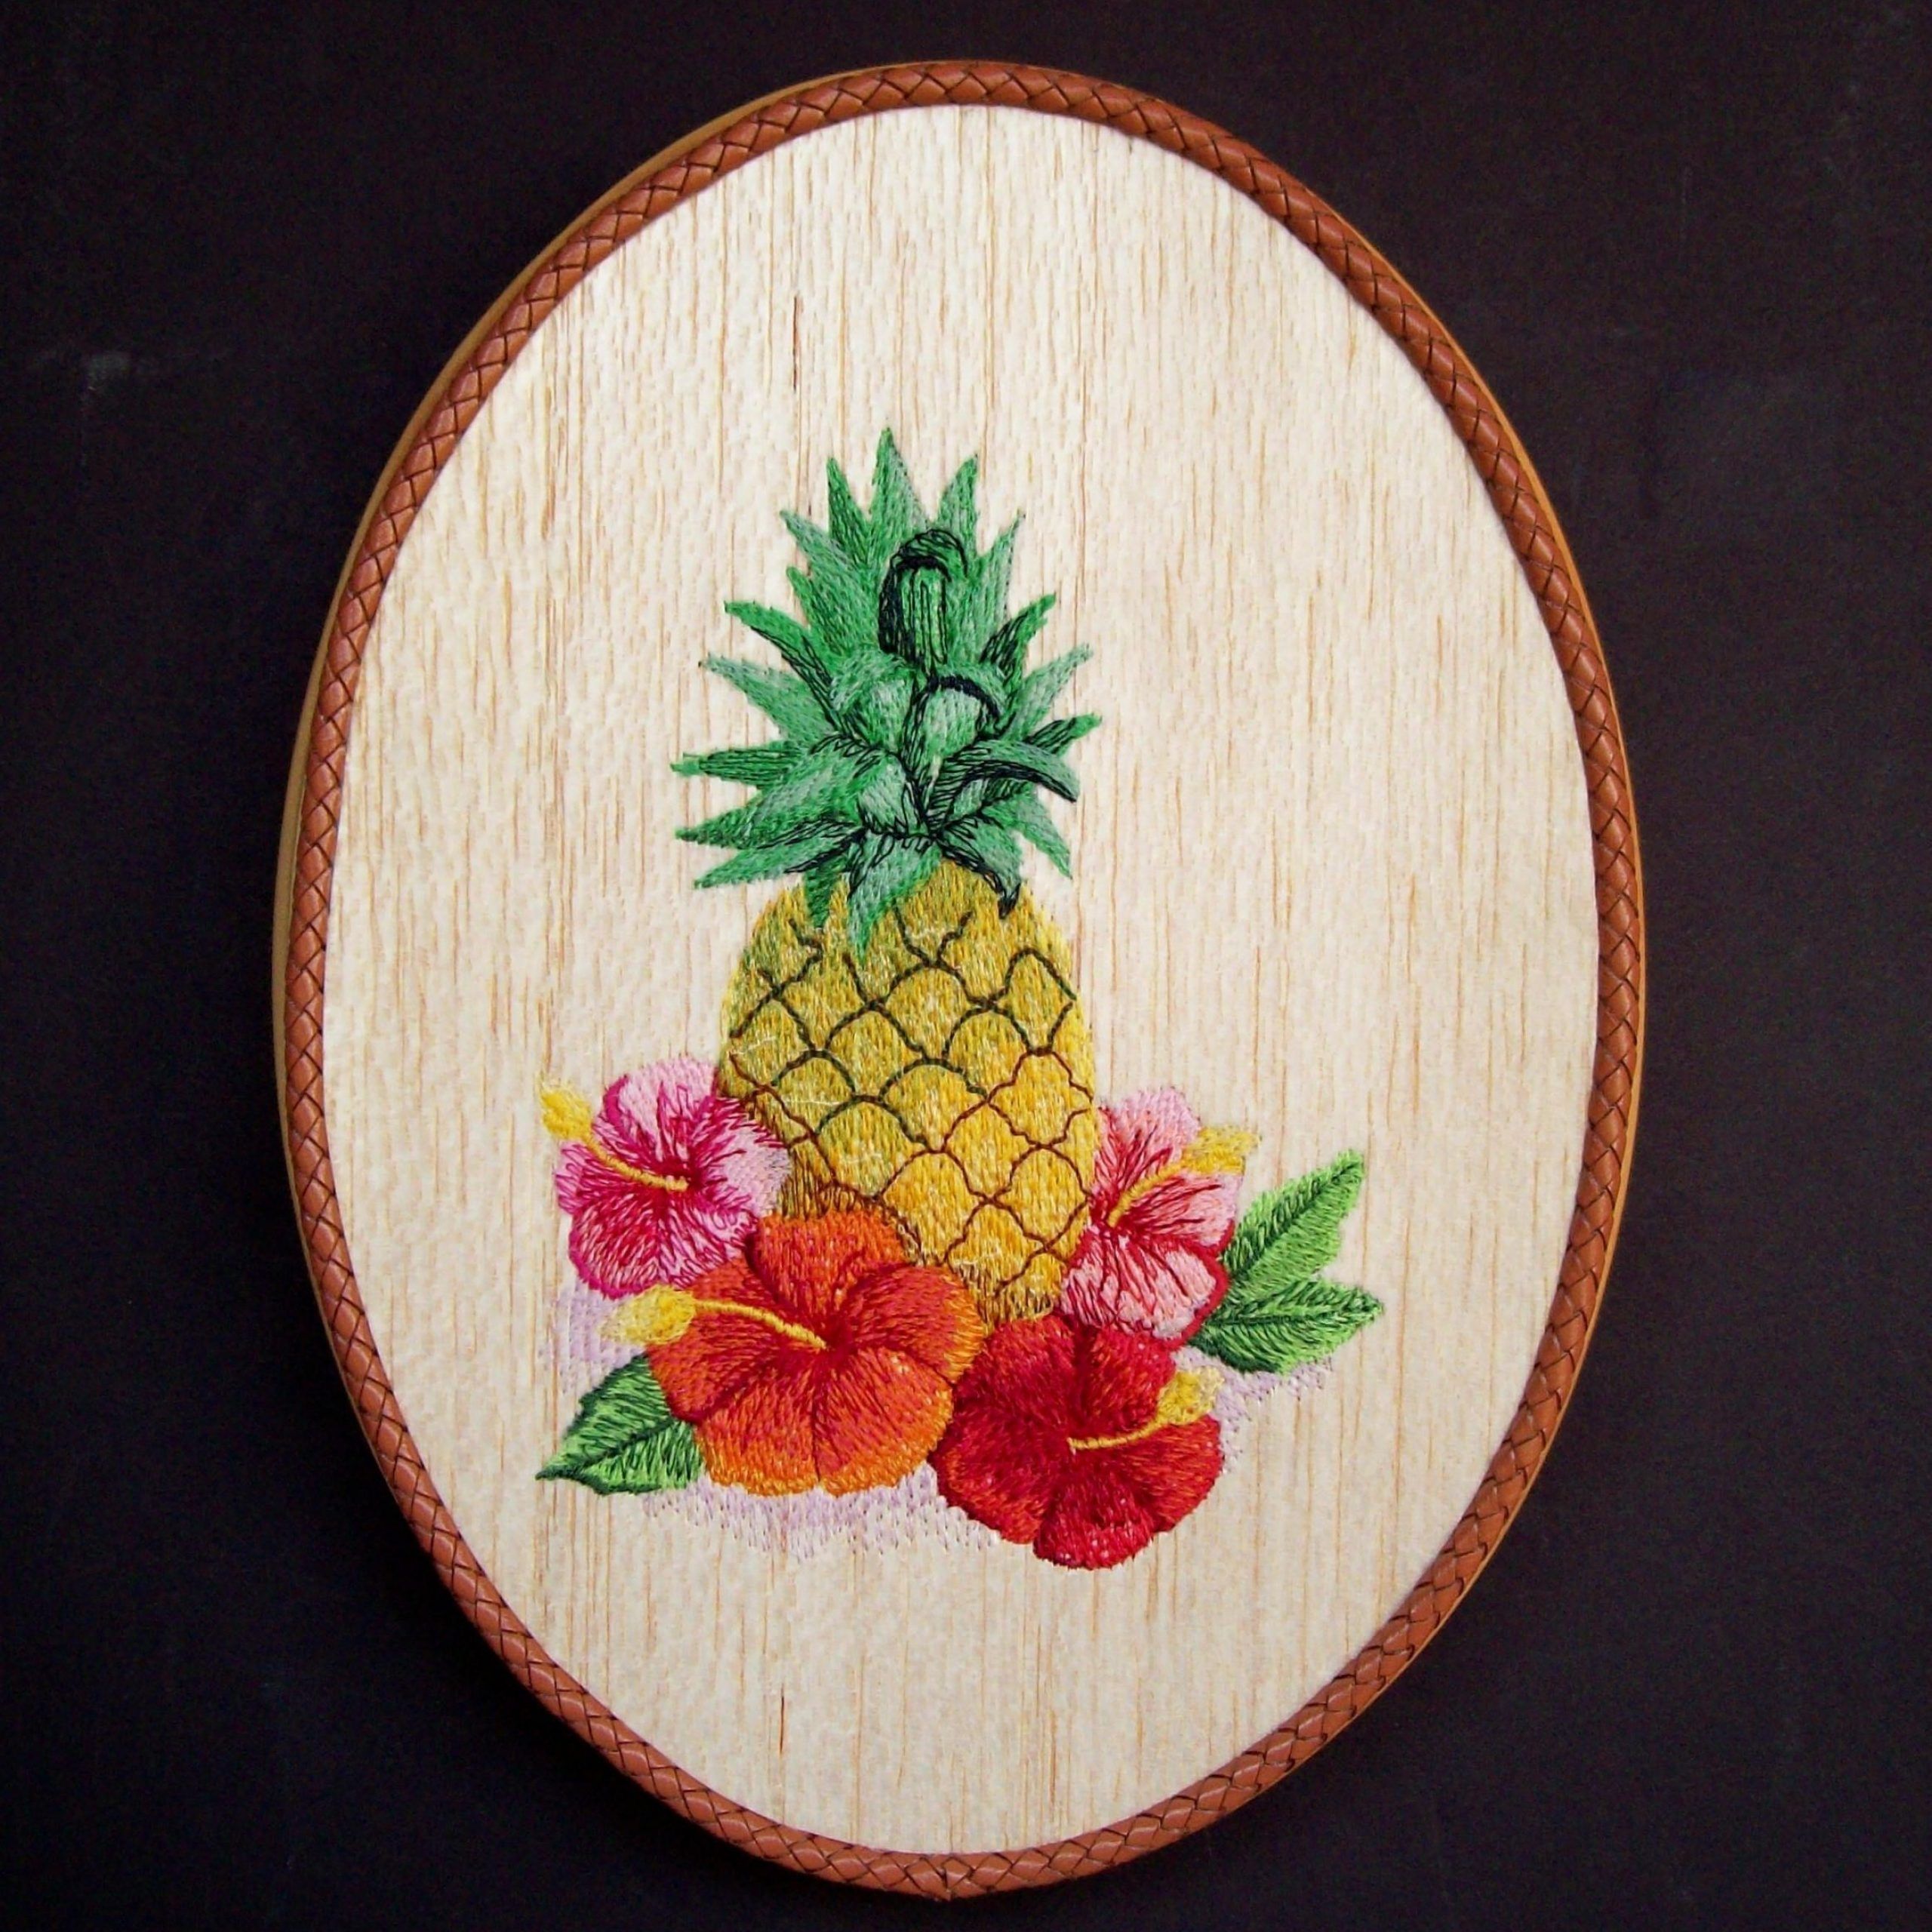 Pineapple Wall Art, Balsa Wood Embroidery Art, Rustic With Regard To Tropical Wood Wall Art (View 8 of 15)